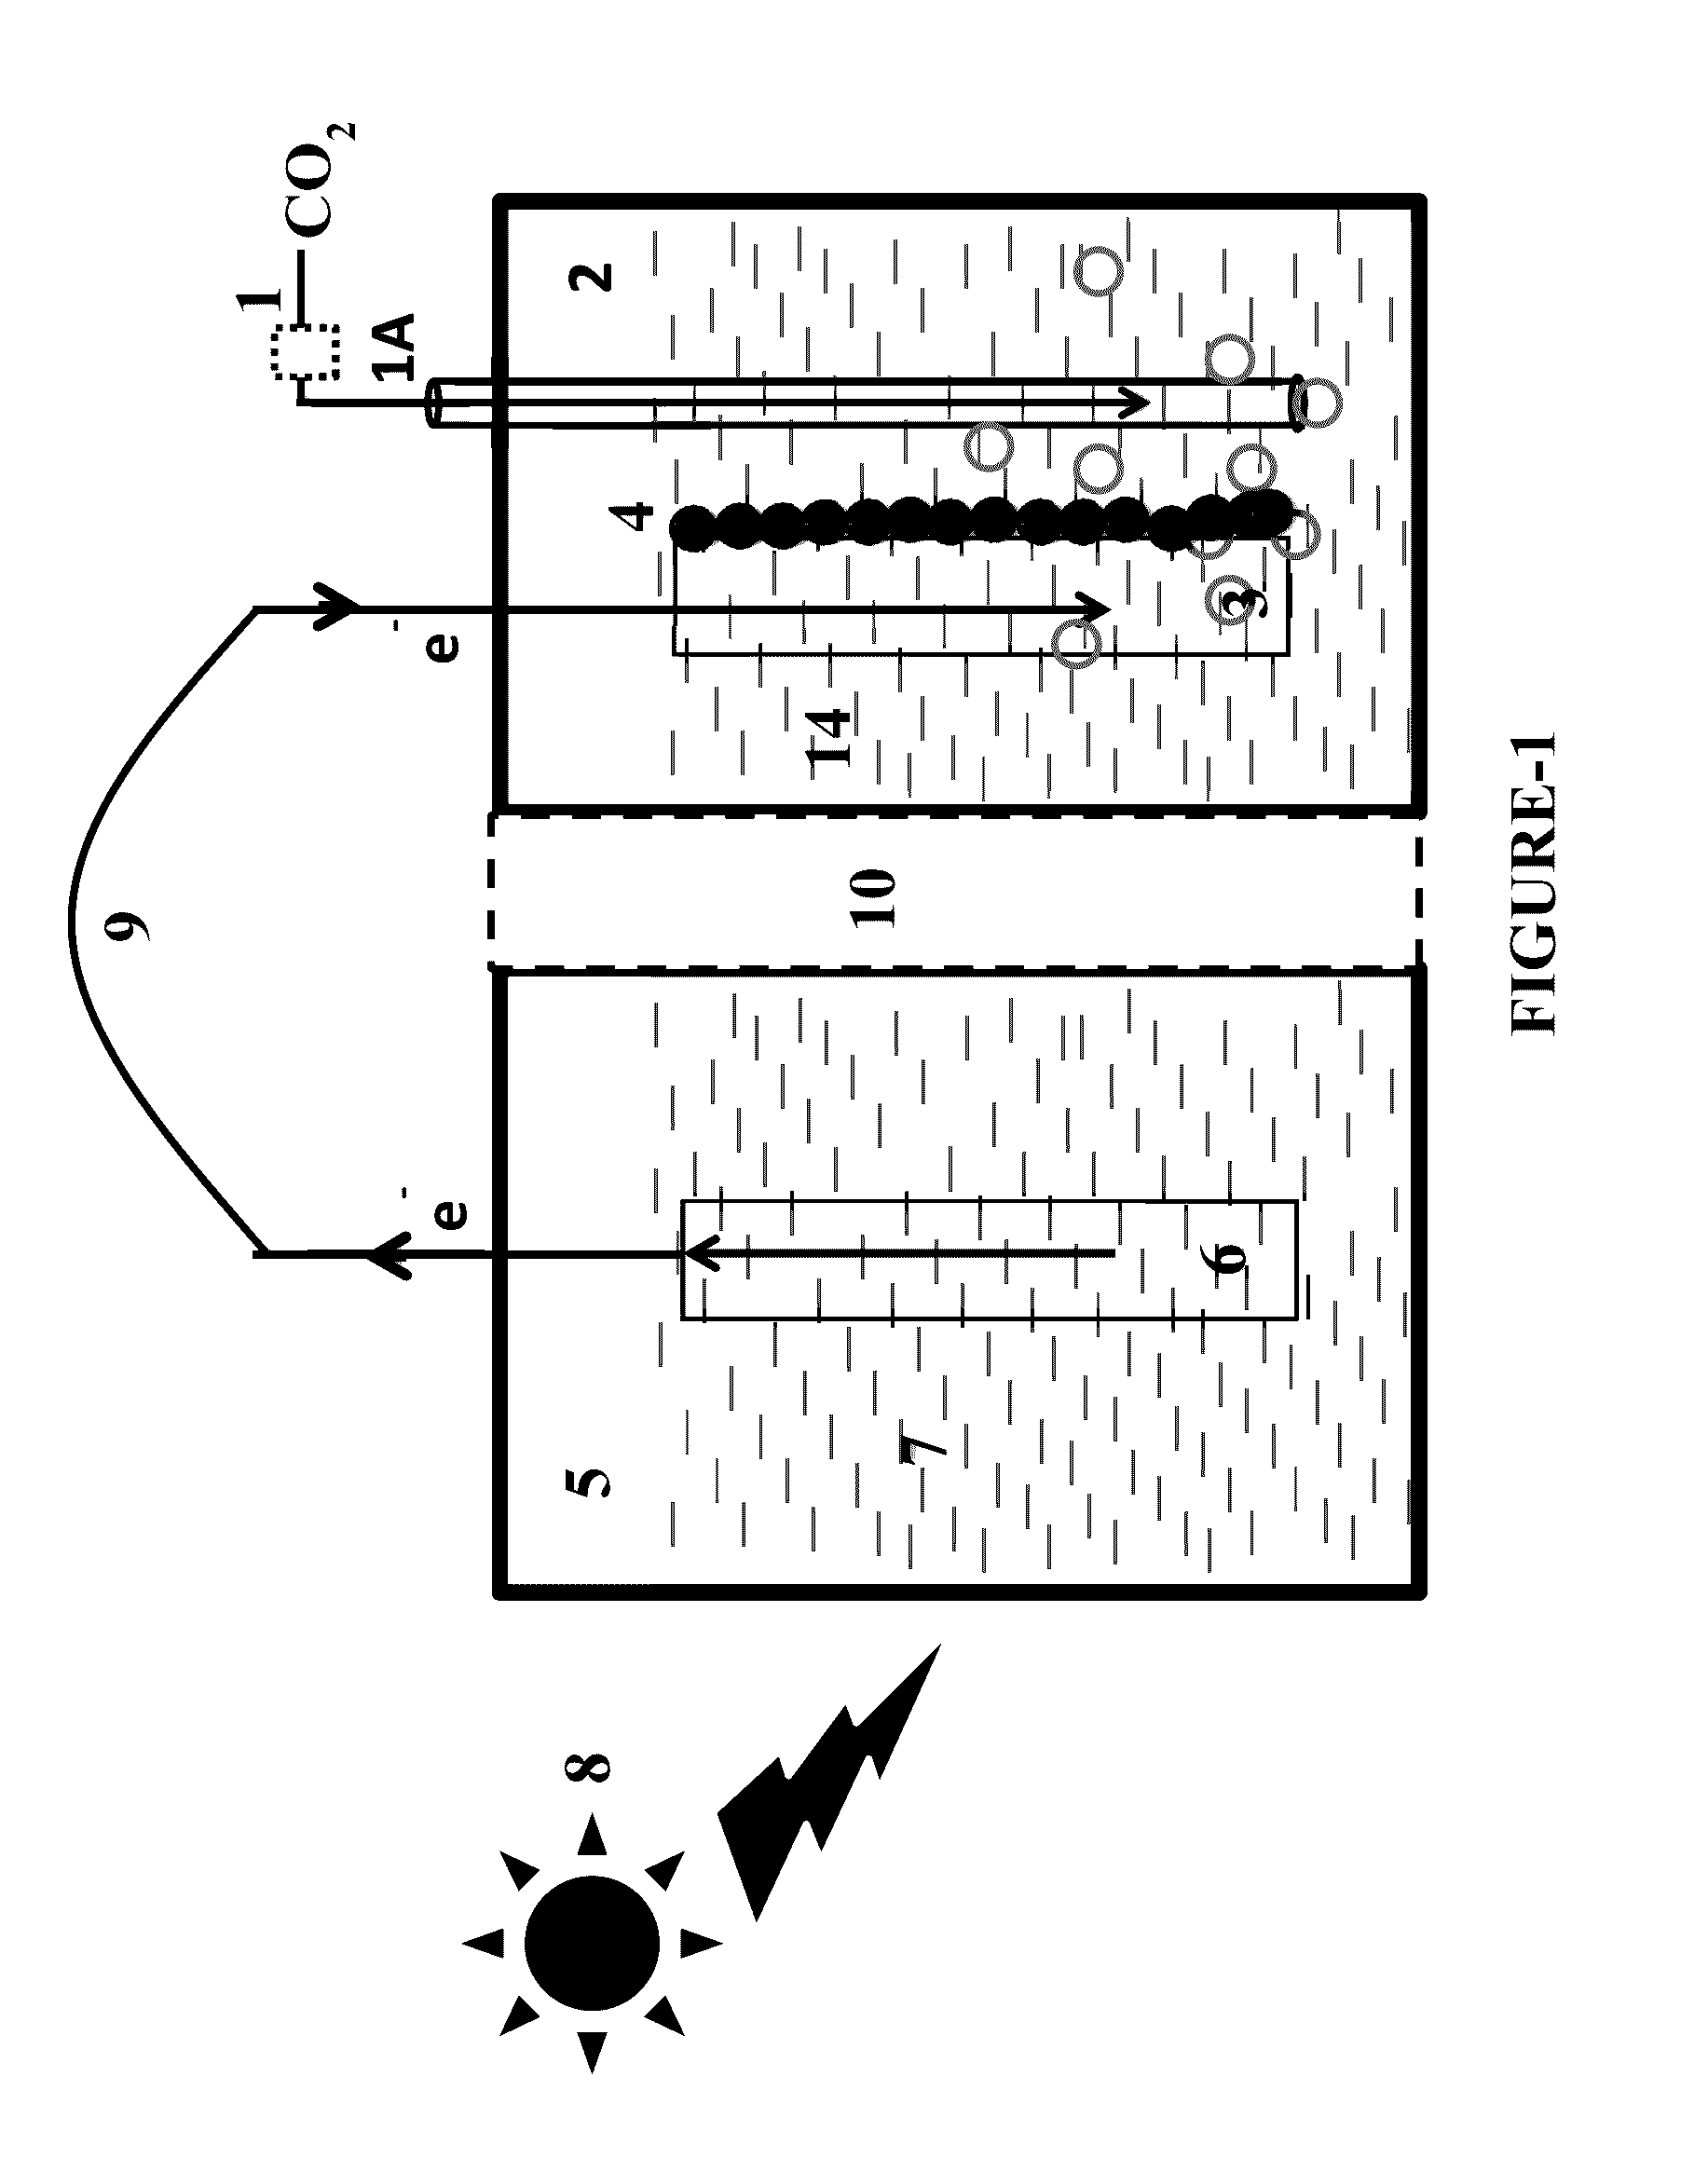 Device and method for conversion of carbon dioxide to organic compounds